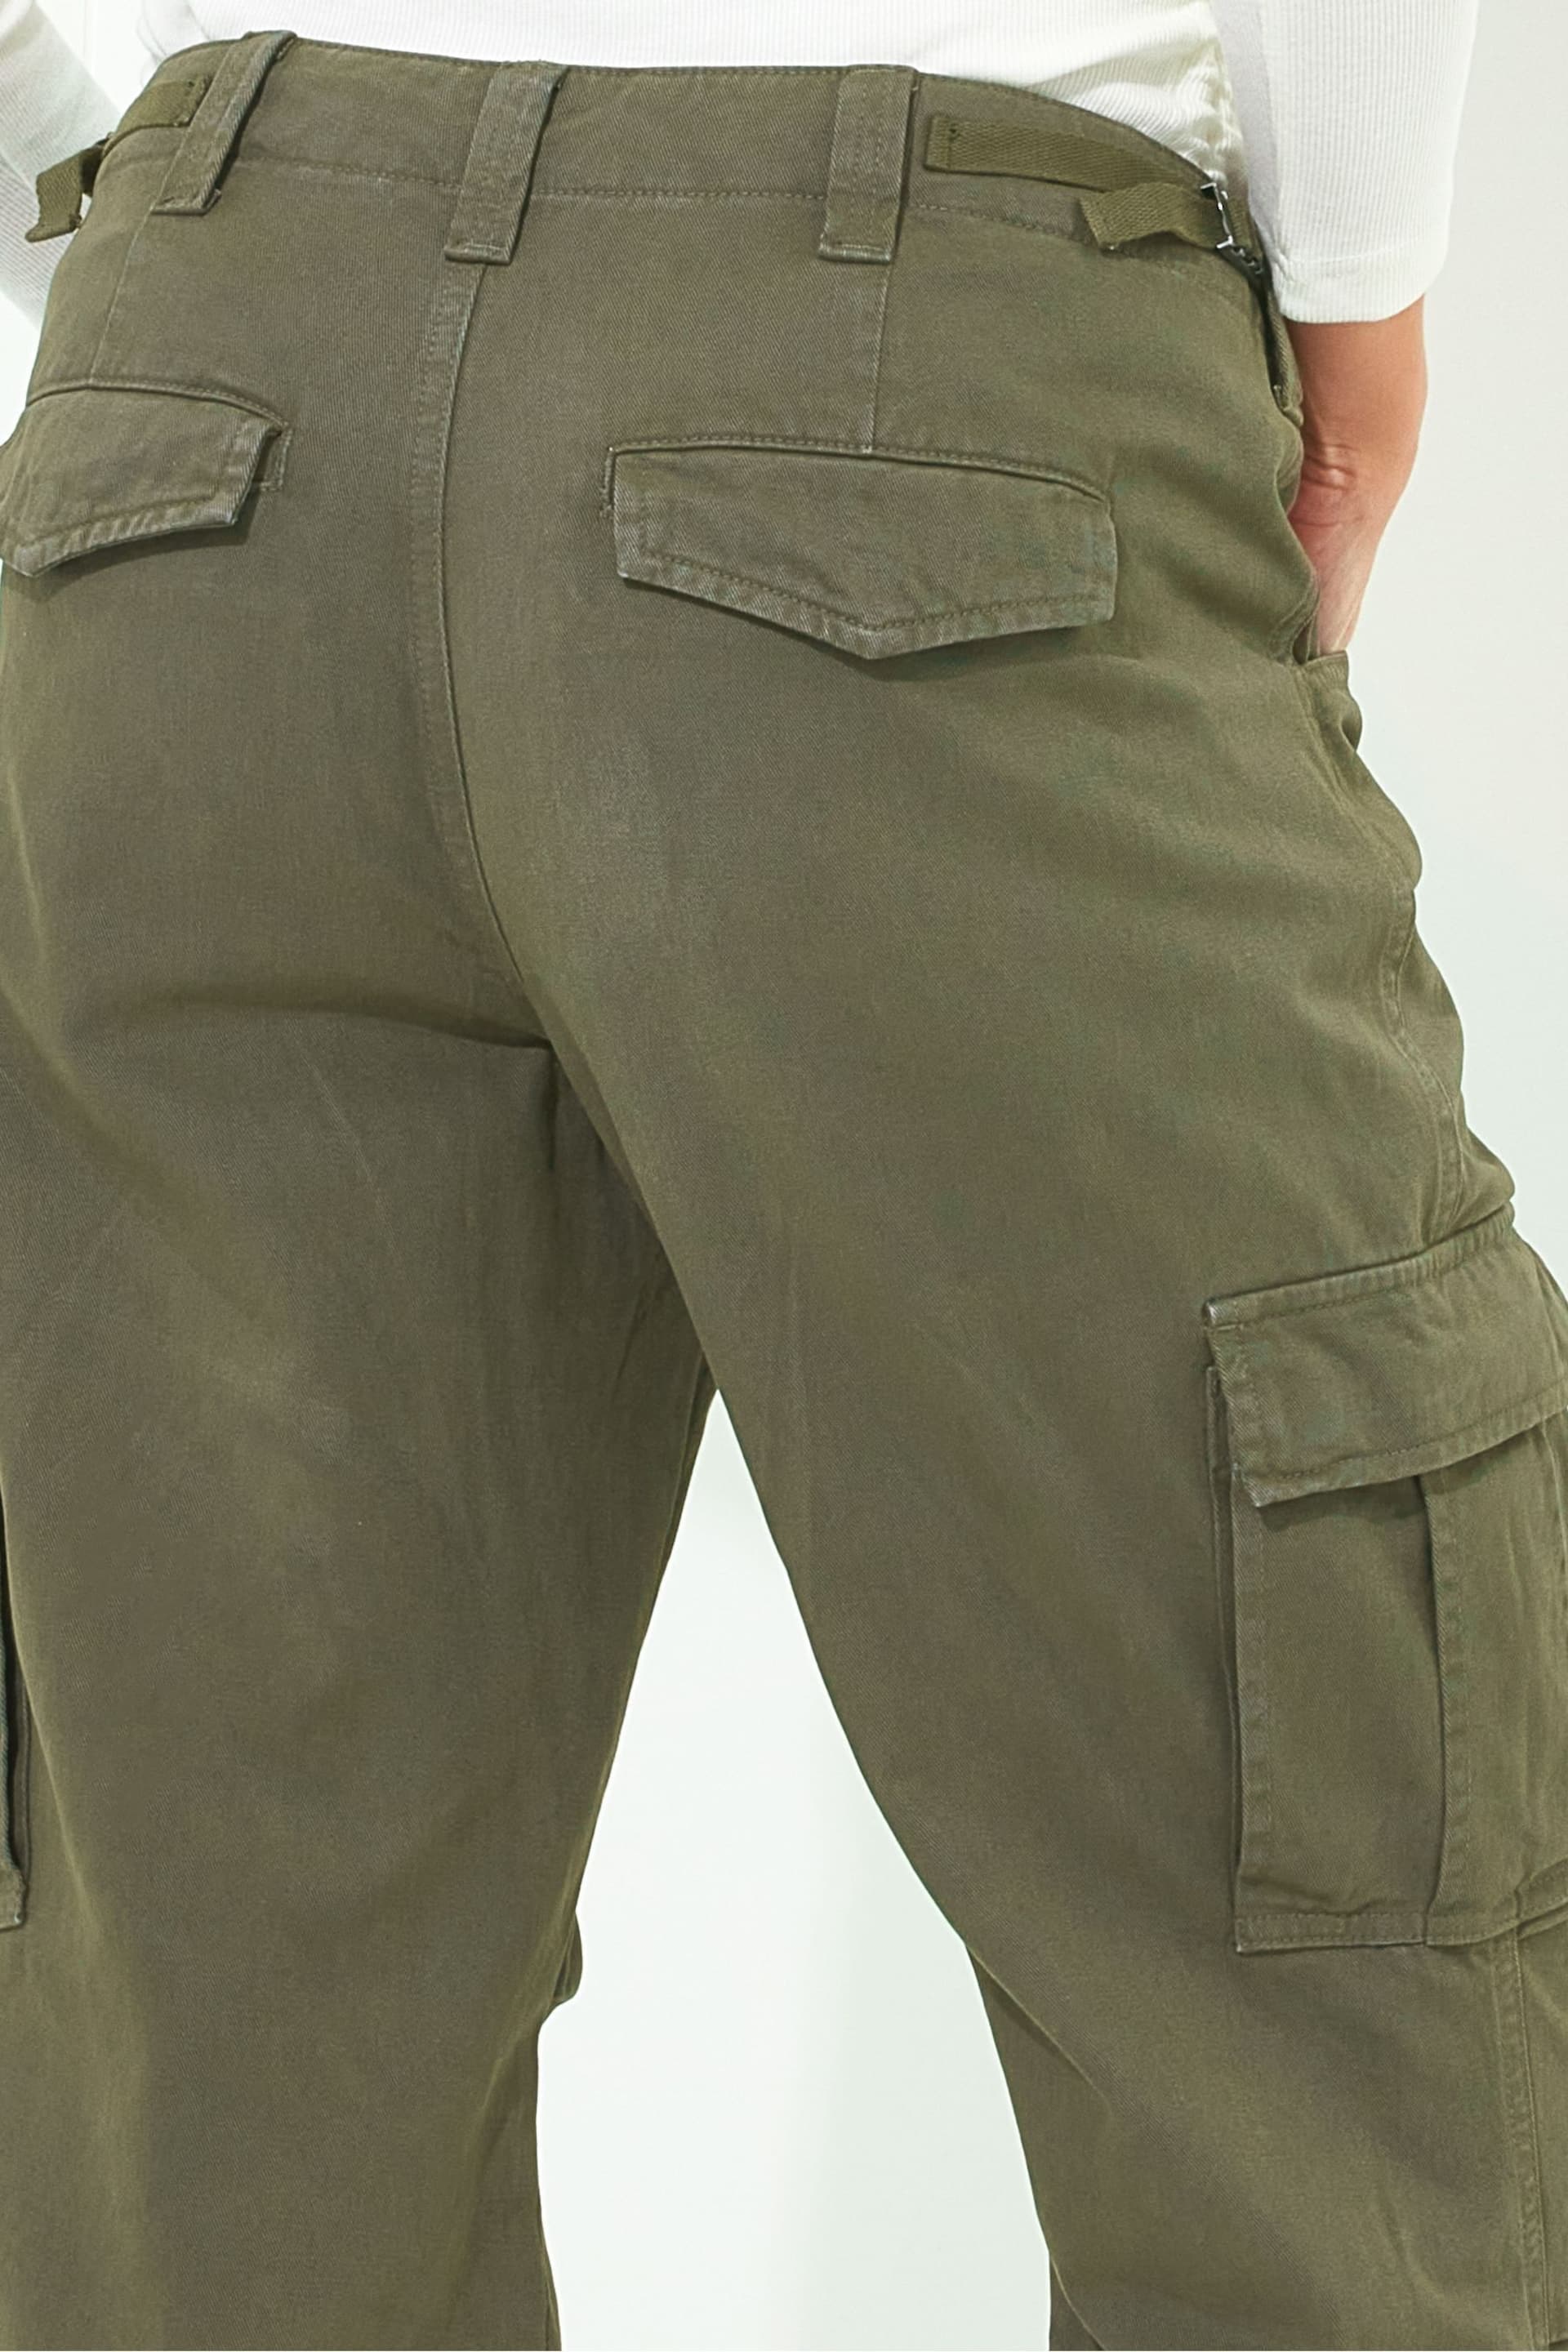 Joe Browns Green Relaxed Fit Cargo Joggers - Image 4 of 5